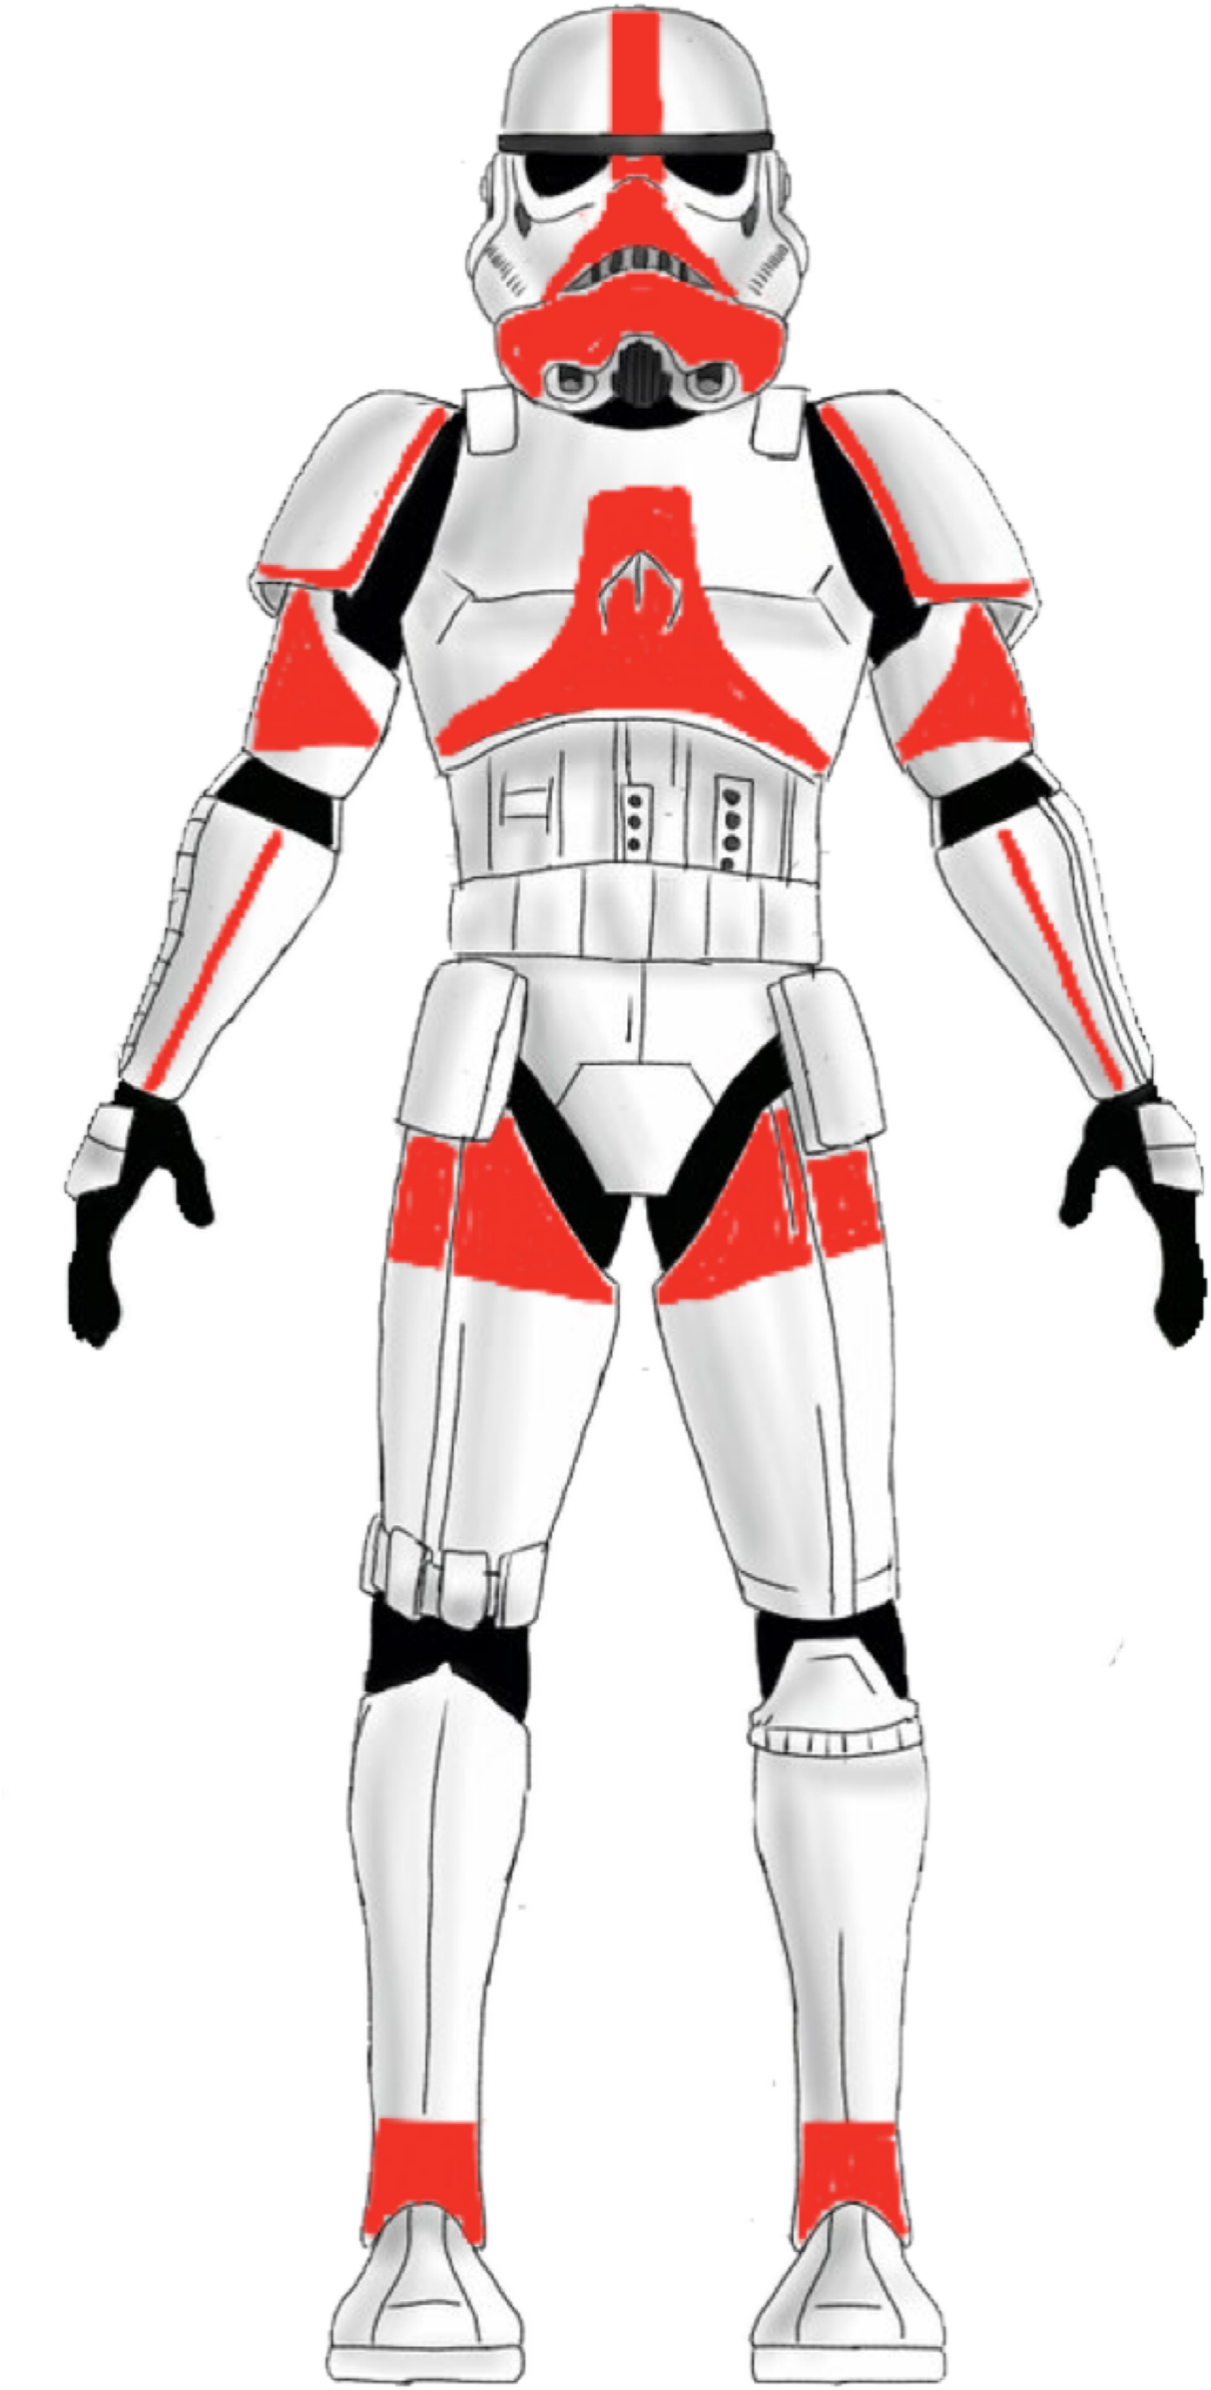 A Cartoon Of A Red And White Robot